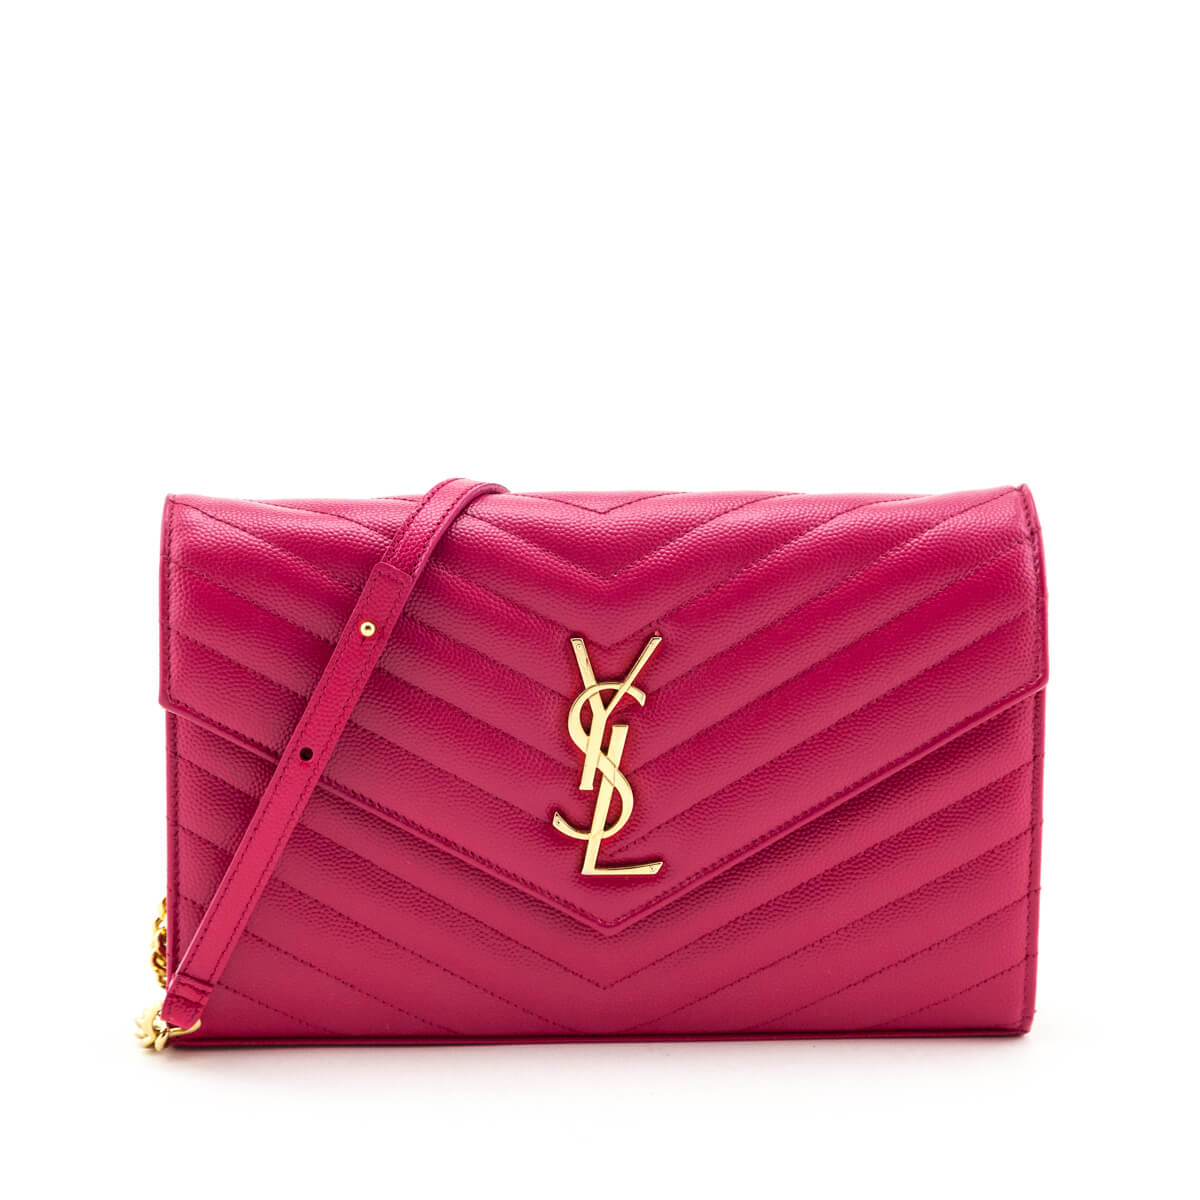 My YSL Fuxia/Fuchsia Collection and Review - Unboxing the Fuchsia Card Case  in Grain De Poudre! 